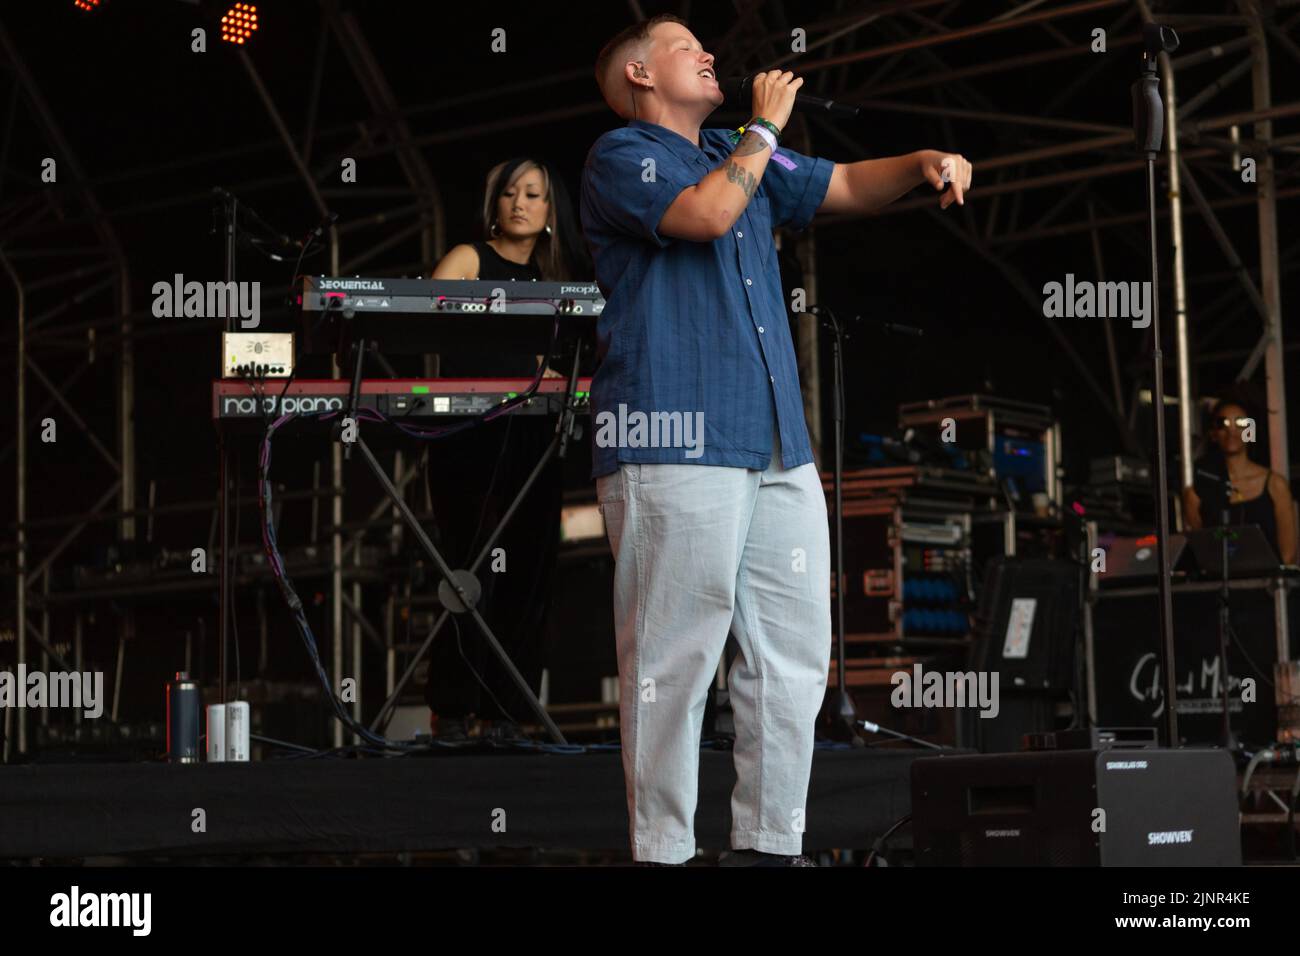 Boomtown Festival, Winchester, UK 12 August 2022 Kae Tempsest performs on Grand Central at Boomtown 2022 Credit: Denise Laura Baker/Alamy Live News Credit: Denise Laura Baker/Alamy Live News Stock Photo